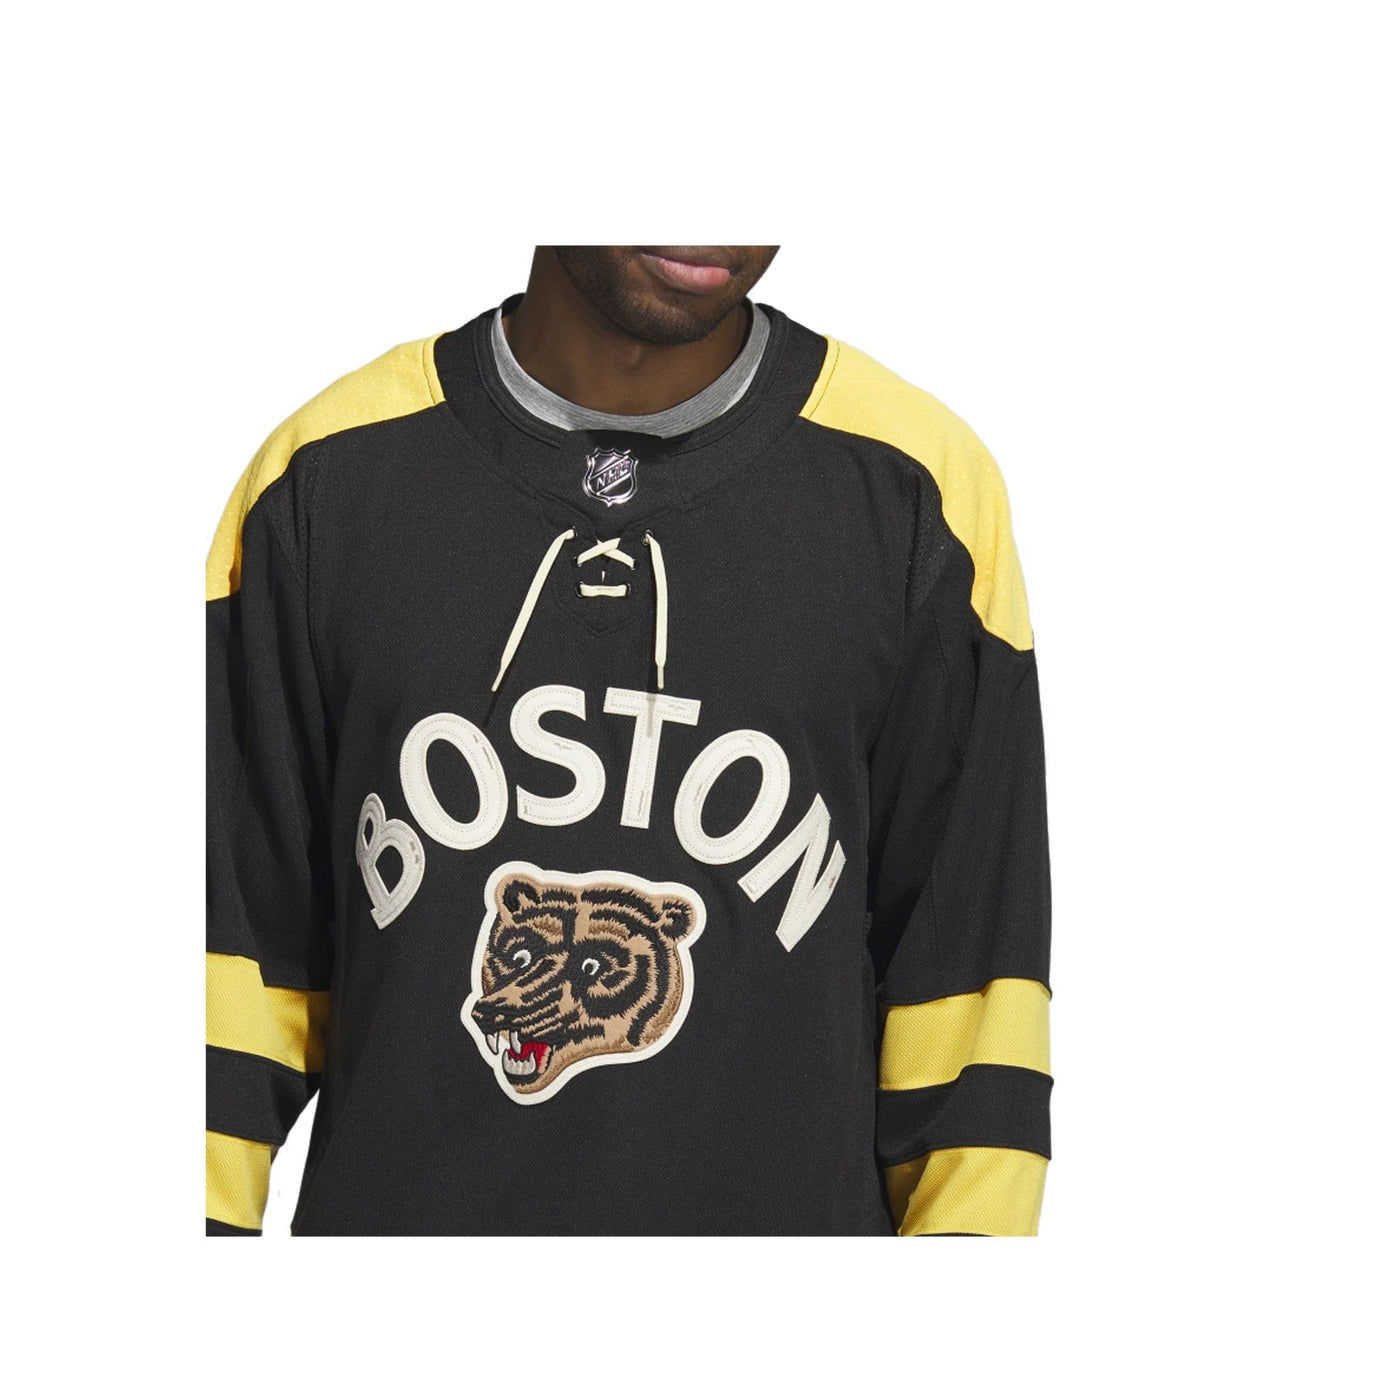 Adidas Authentic Boston Bruins 2019 NHL Winter Classic Jersey White 50